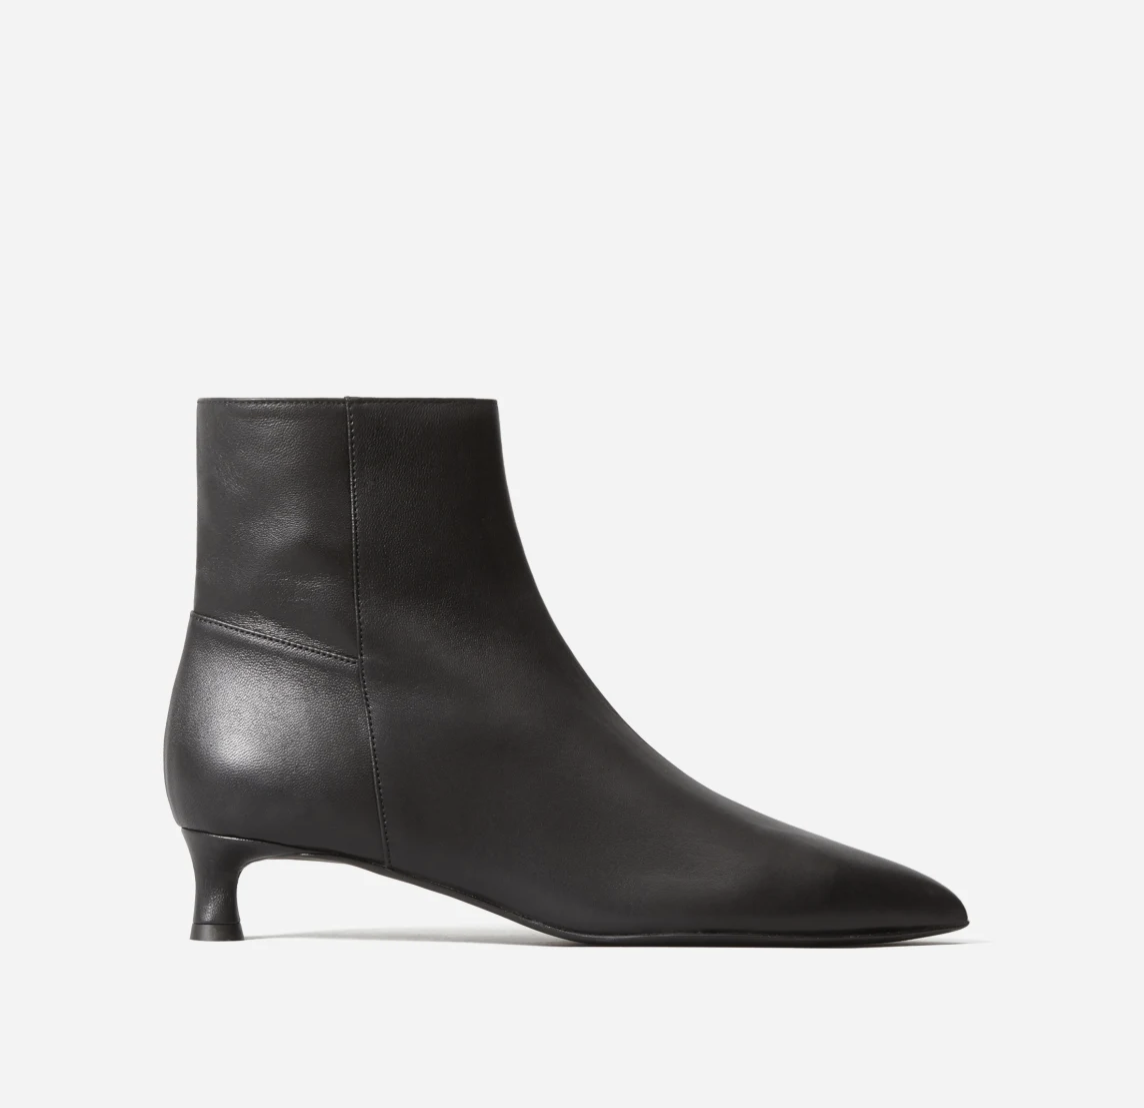 everlane-editor-boot.png